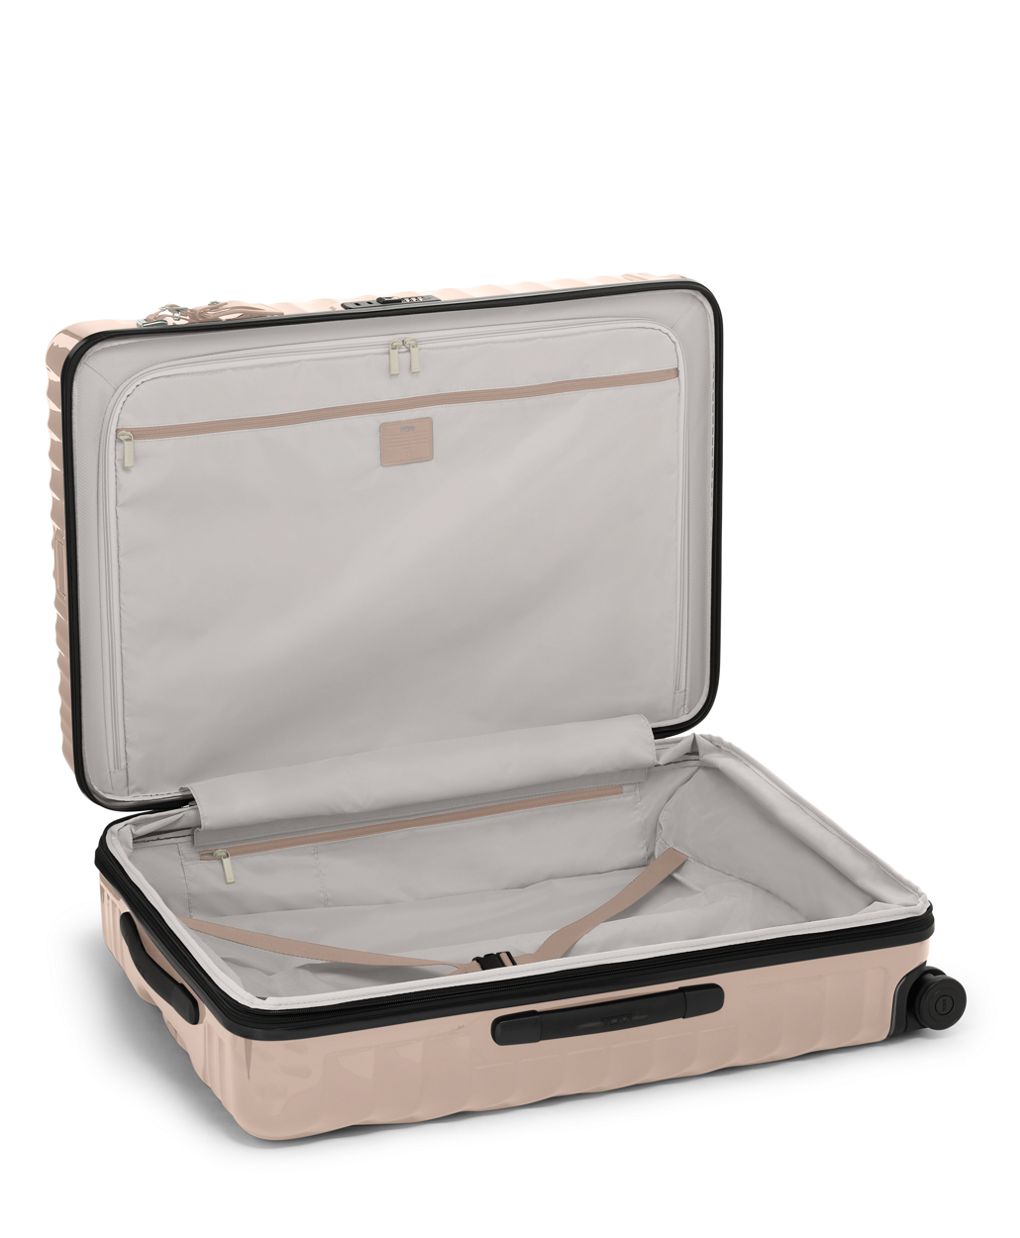 Extended Trip Expandable 4 Wheel Packing Case | Tumi US